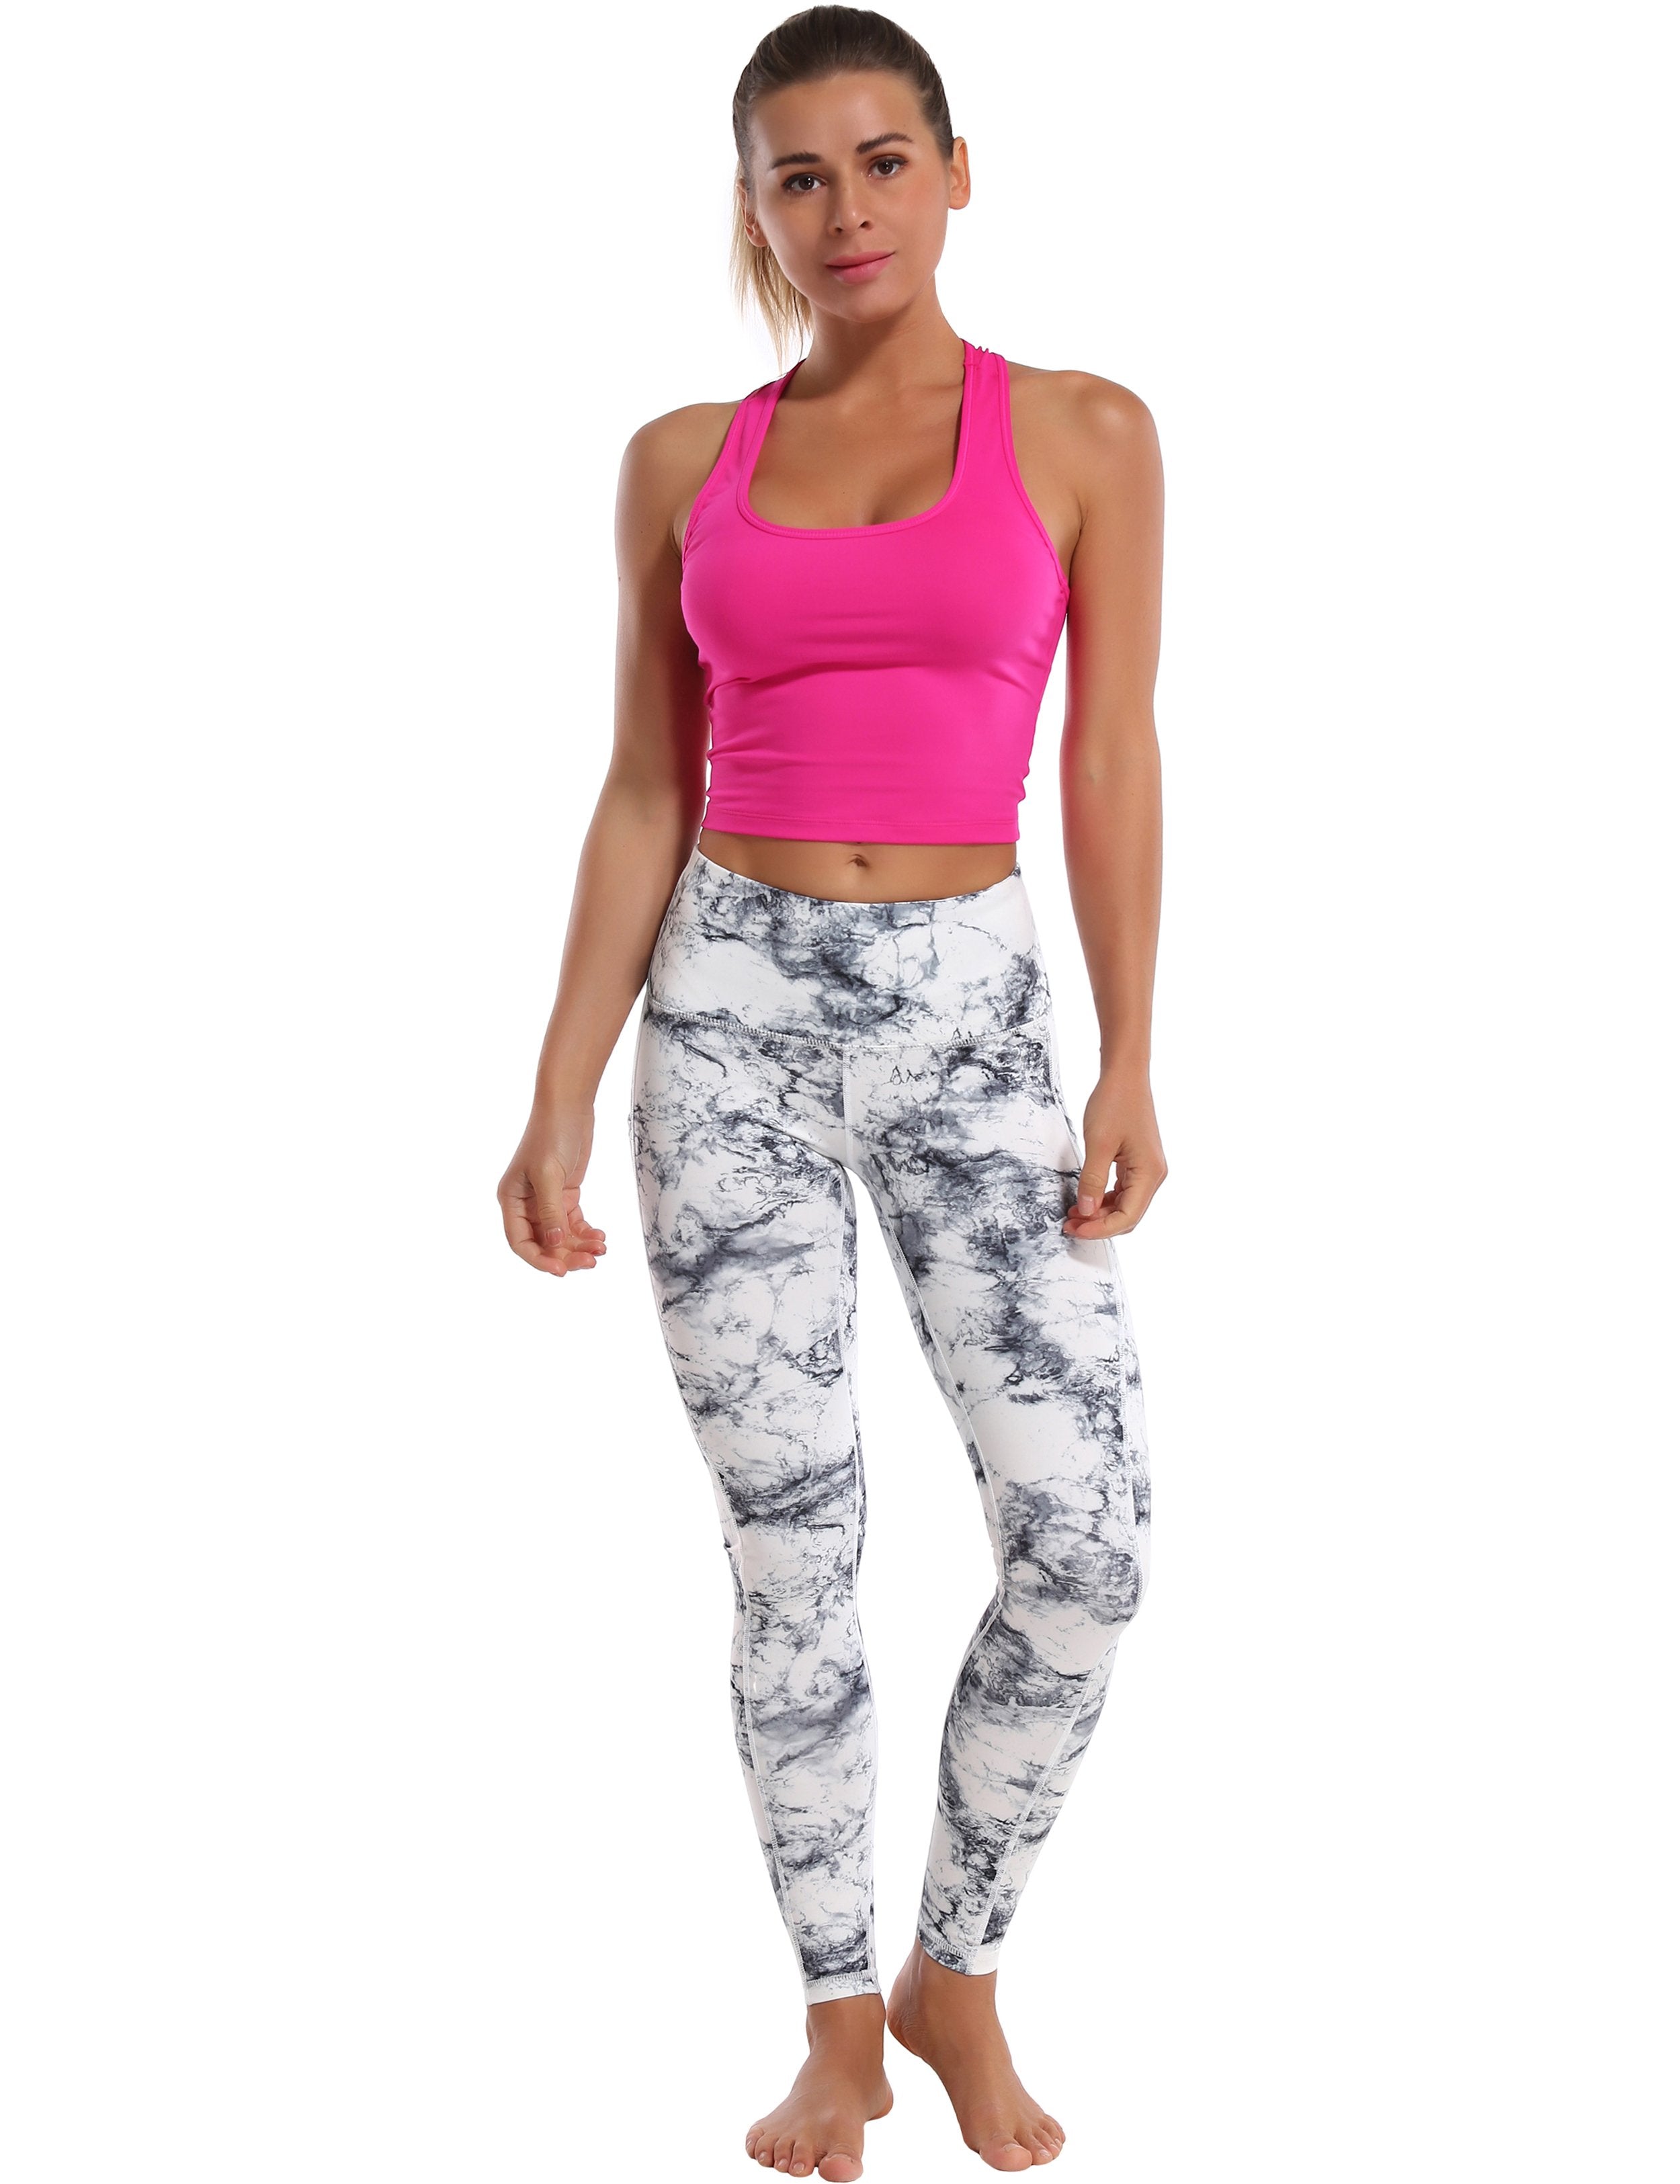 Hip Line Side Pockets Gym Pants arabescato Sexy Hip Line Side Pockets 78%Polyester/22%Spandex Fabric doesn't attract lint easily 4-way stretch No see-through Moisture-wicking Tummy control Inner pocket